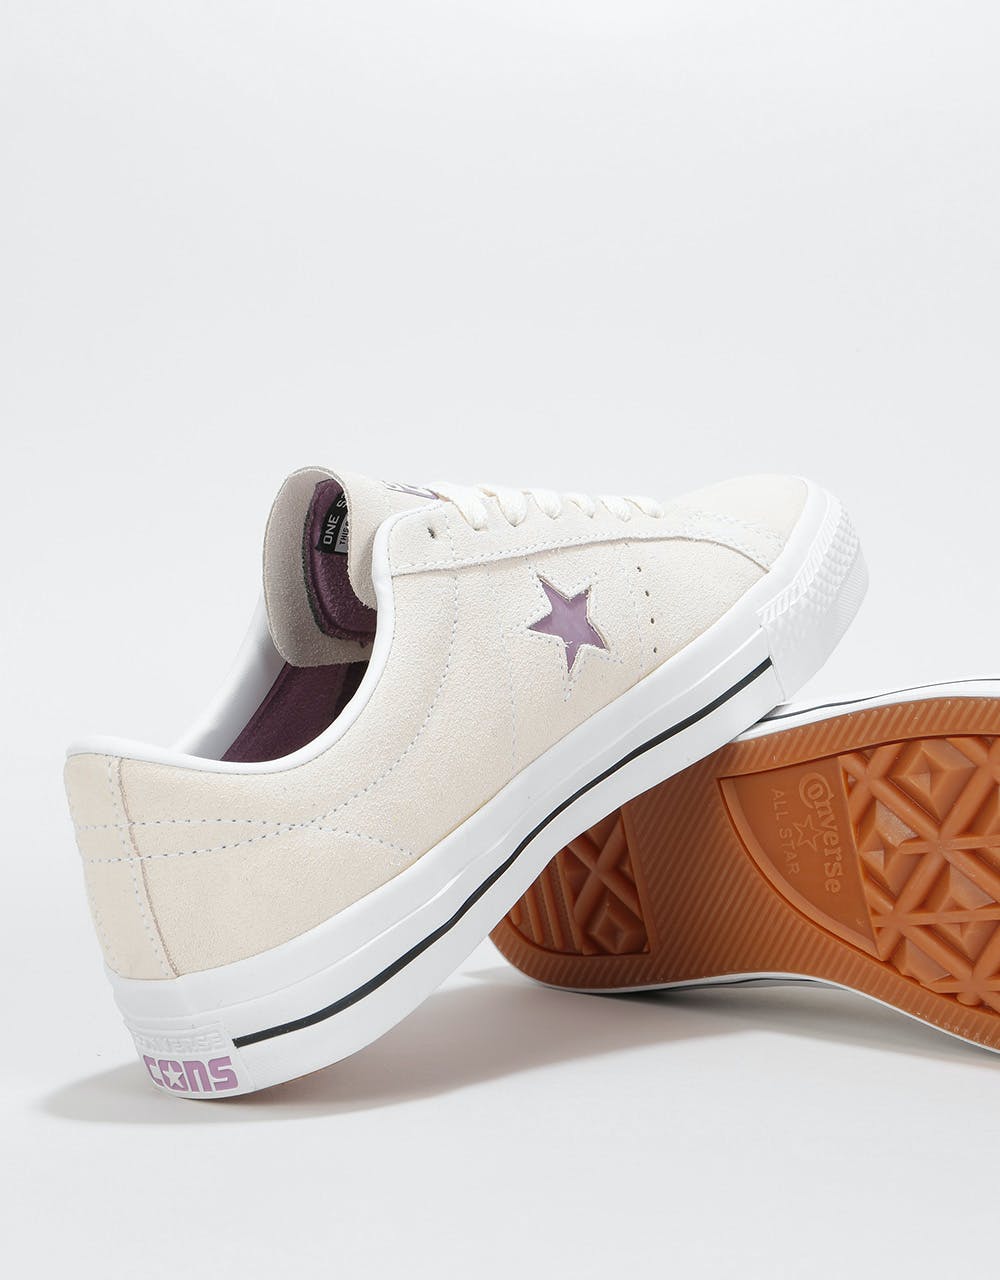 Converse One Star Pro Ox Skate Shoes - Egret/Violet Dust/White